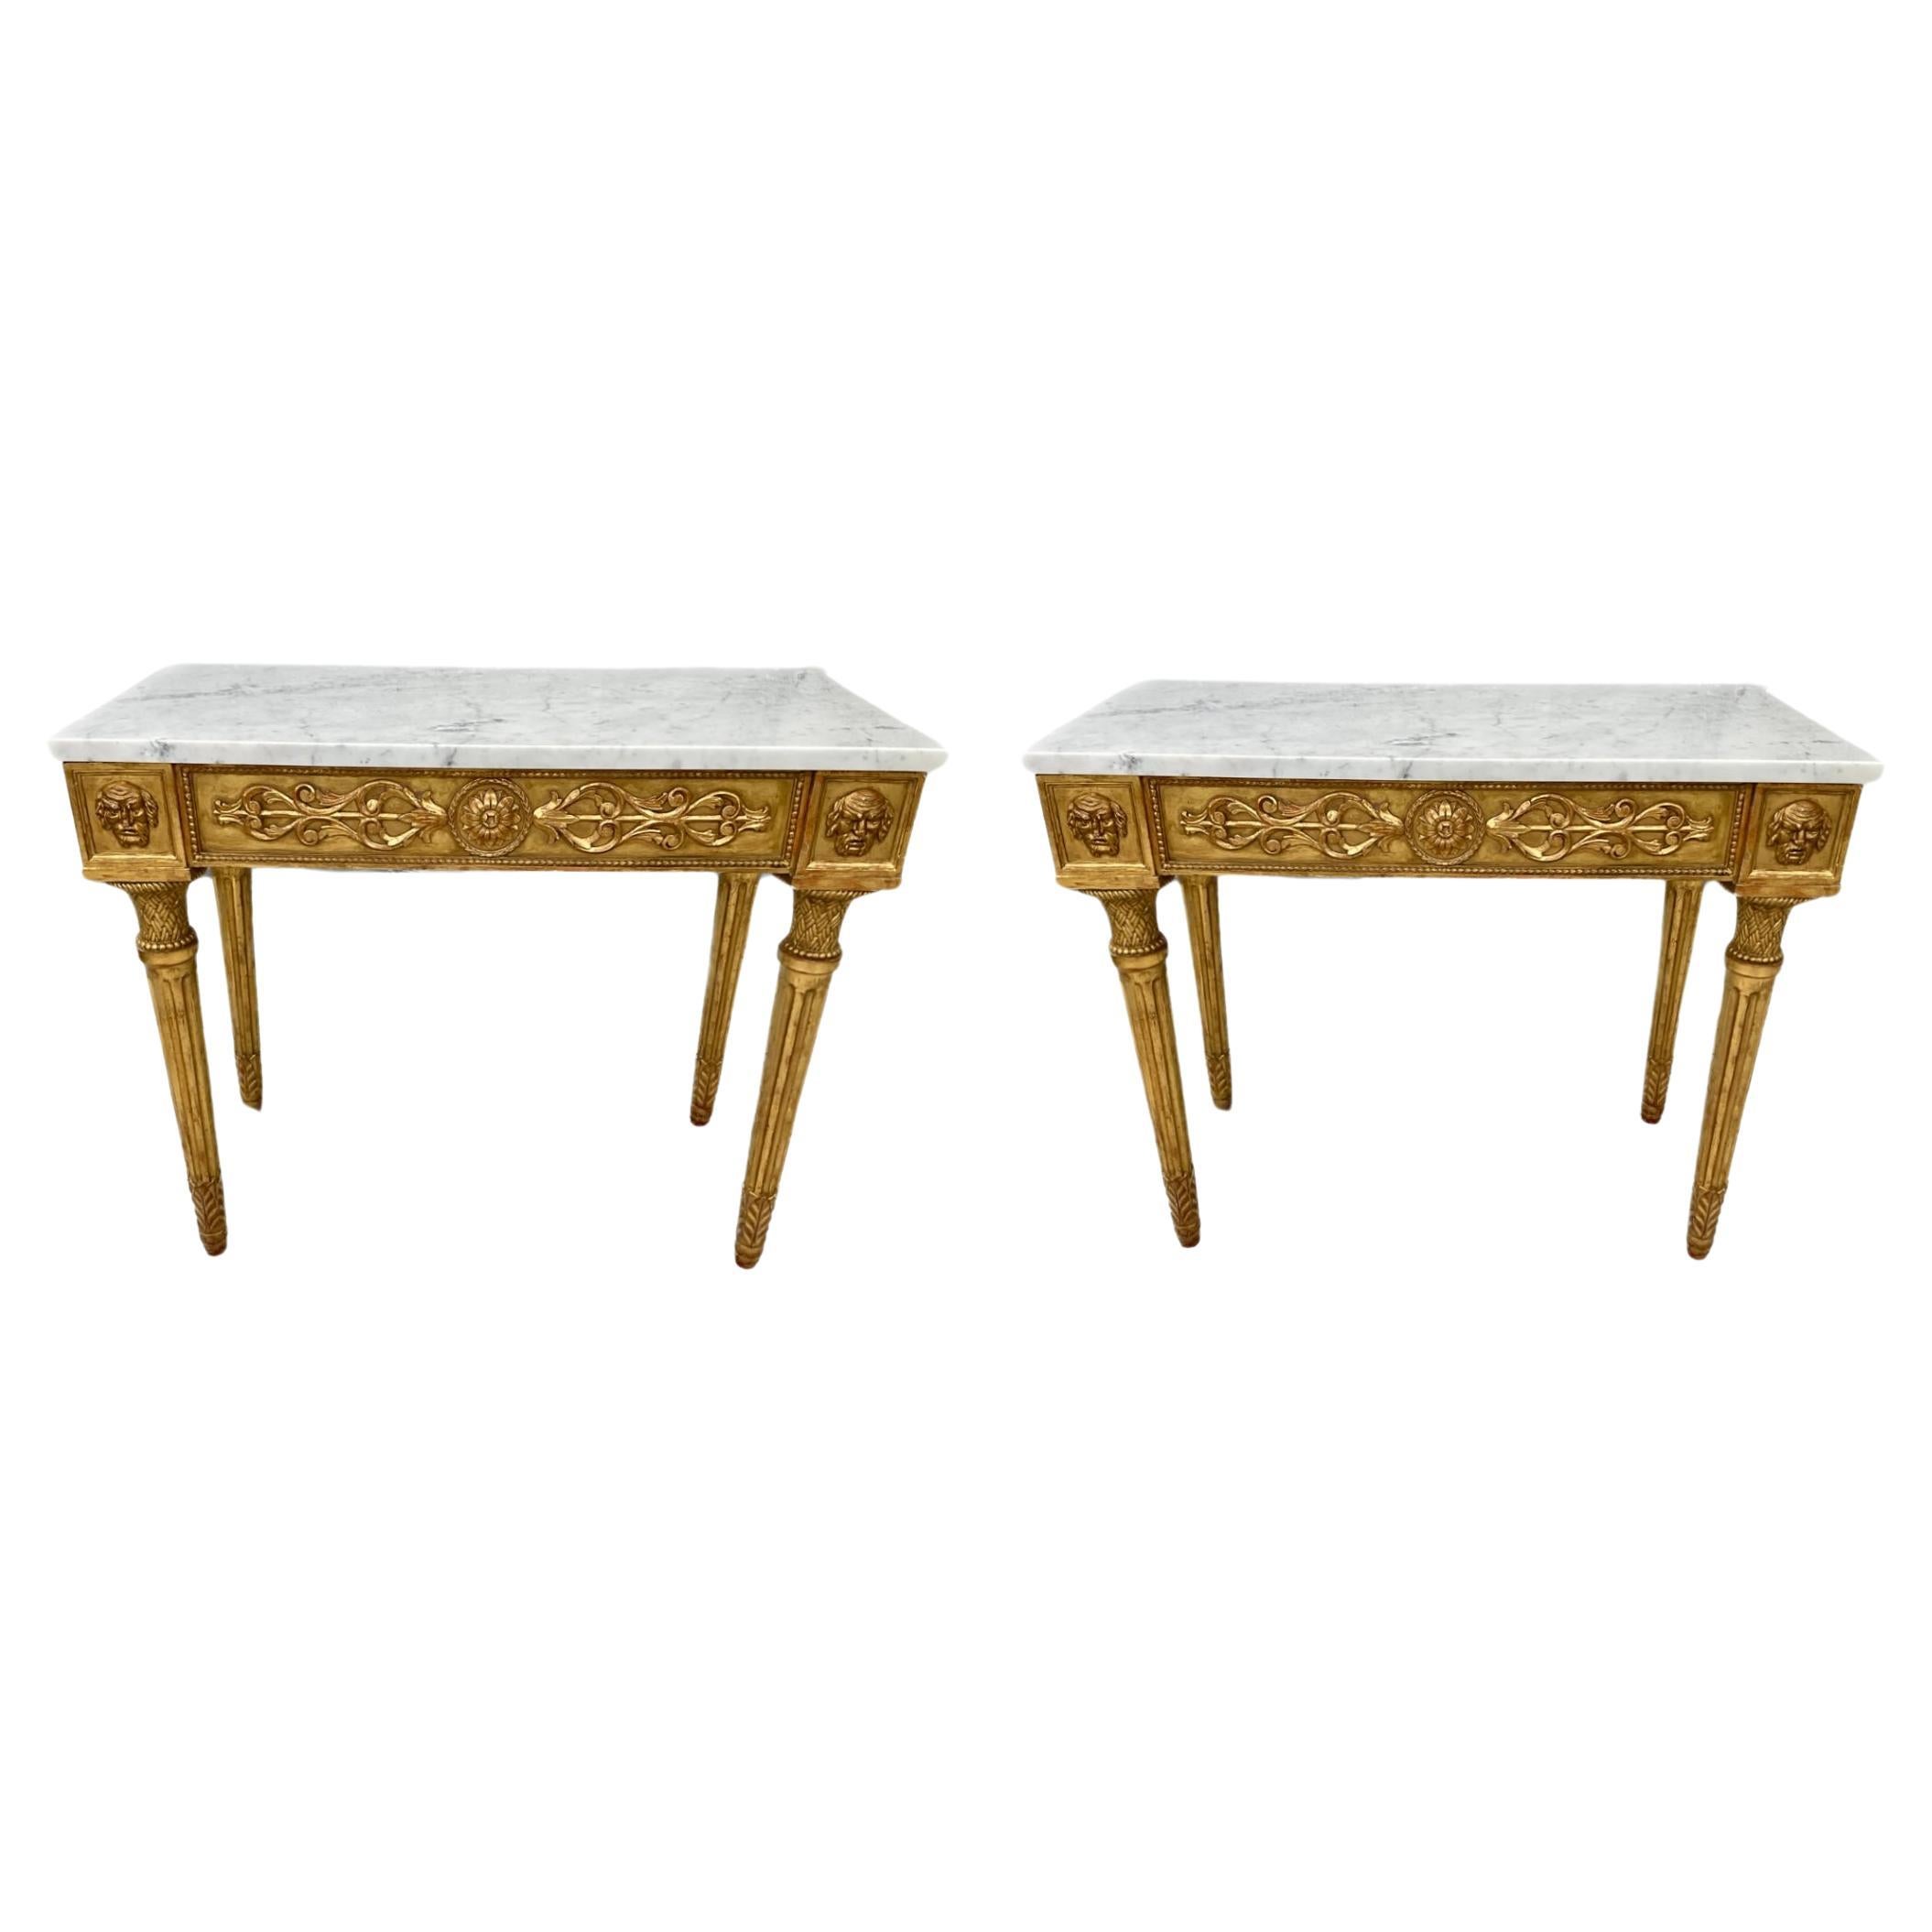 Pair Of 19th Century Italian Neoclassical Giltwood Console table With Marble Top For Sale